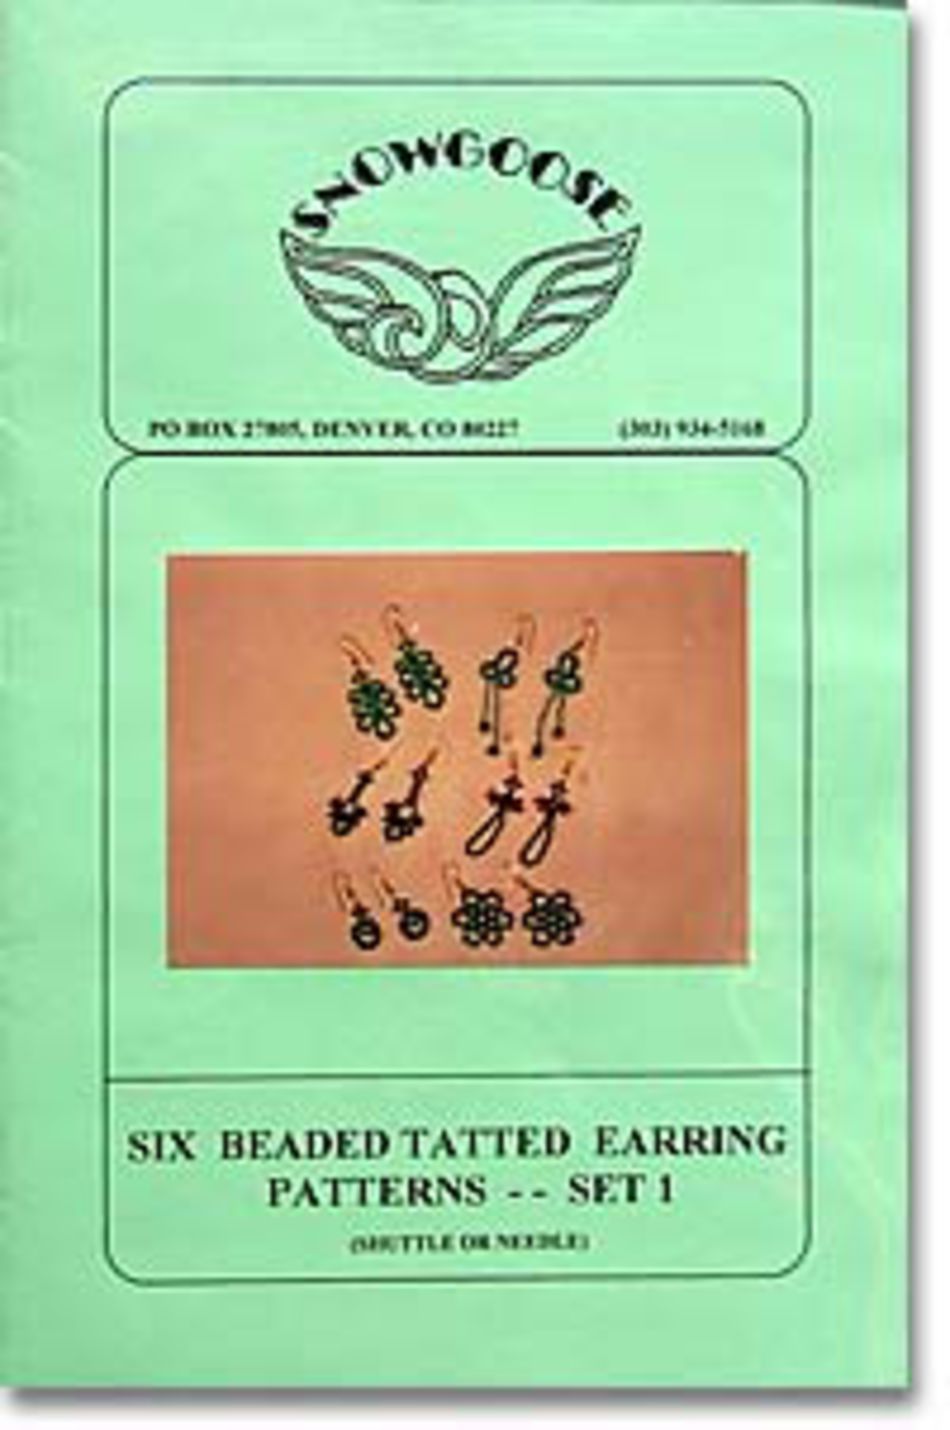 Bobbin Lace and Tatting Patterns Beaded Tatted Earrings Set 1